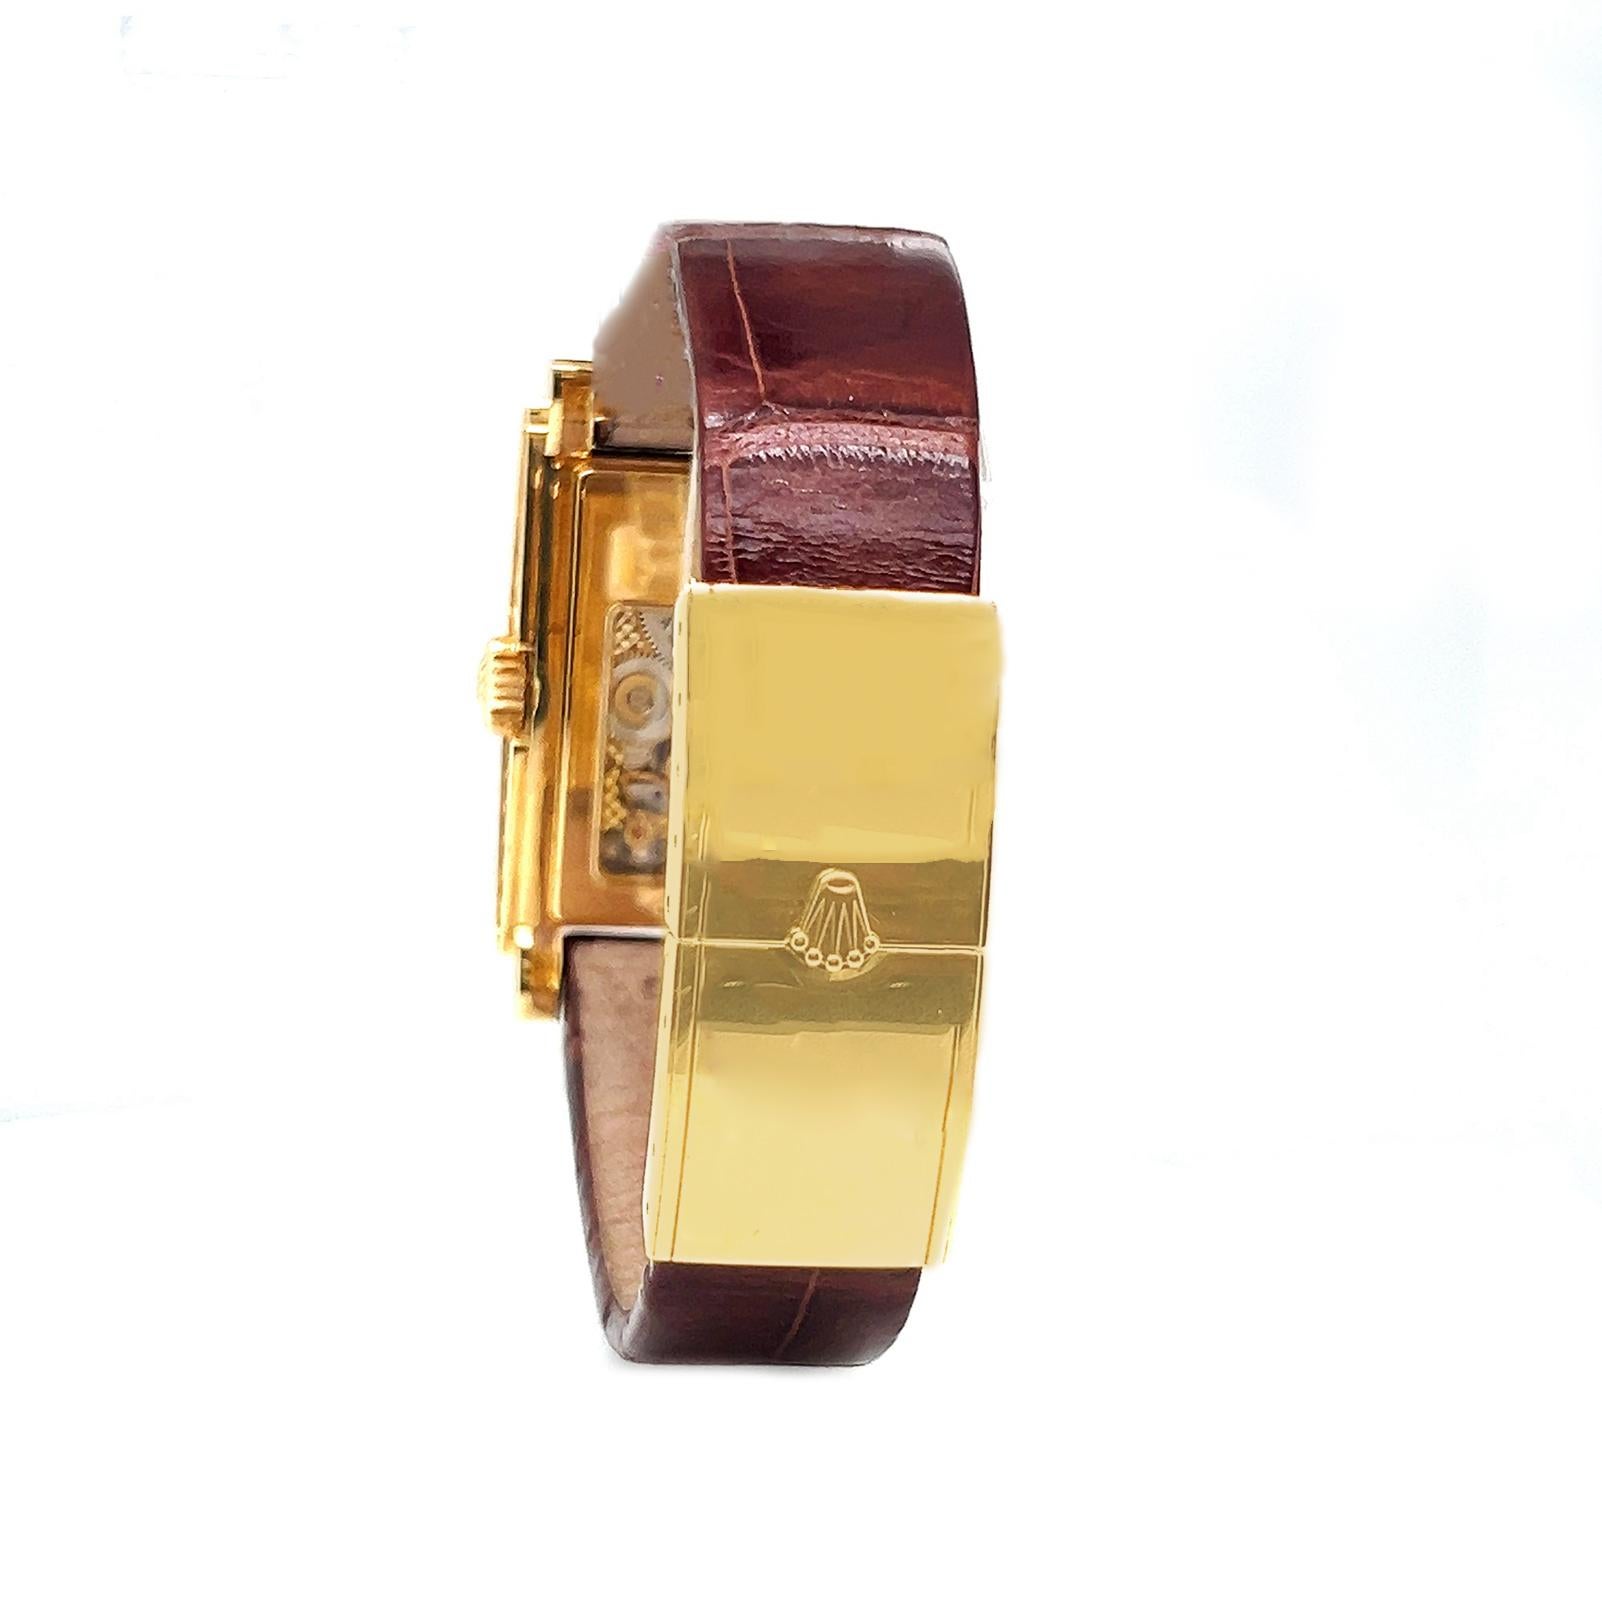 Rolex Prince Cellini Unisex Mens Womens 18K Yellow Gold Watch 5440/8 

Description:
Elevate your style with the timeless elegance of the Rolex Prince Cellini Men's 18K Yellow Gold Watch 5440/8. This exquisite timepiece boasts a manual winding